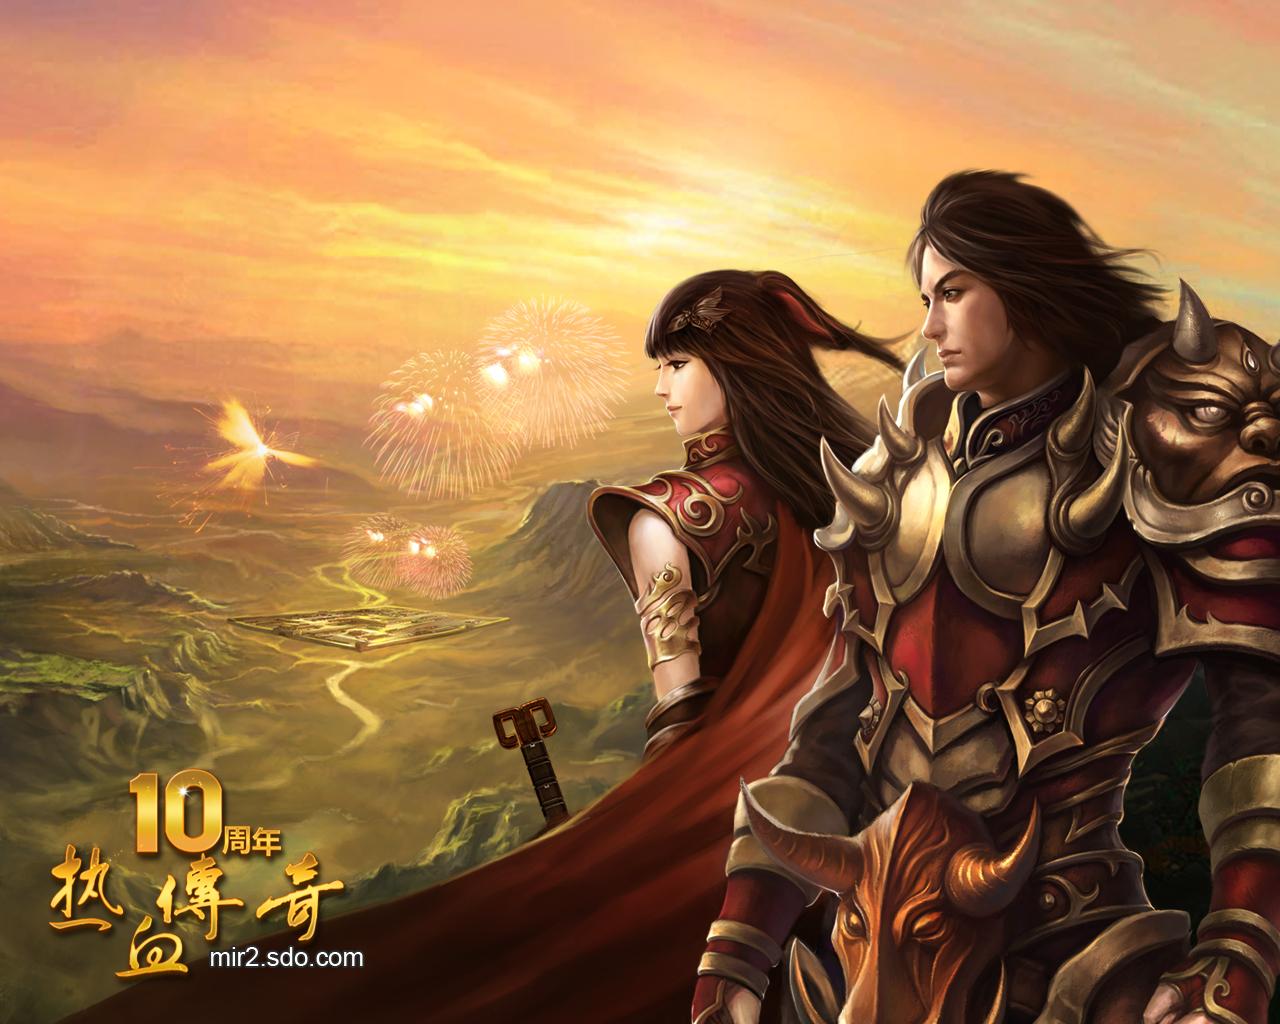 Nice Images Collection: The Legend Of Mir 2 Desktop Wallpapers